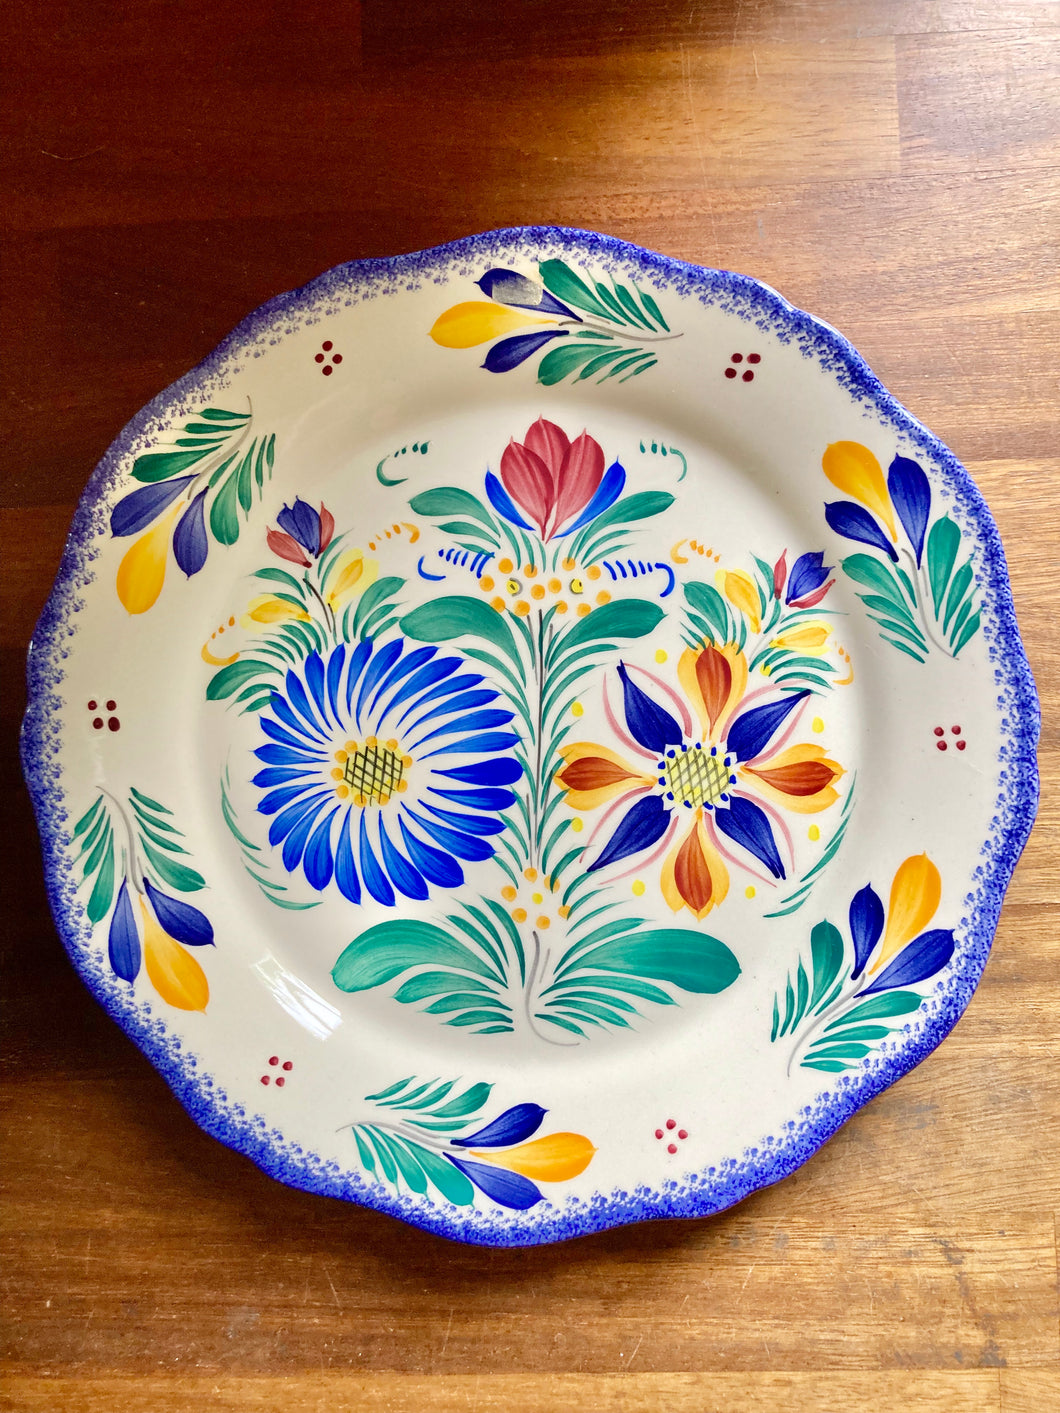 A glorious Quimper plate